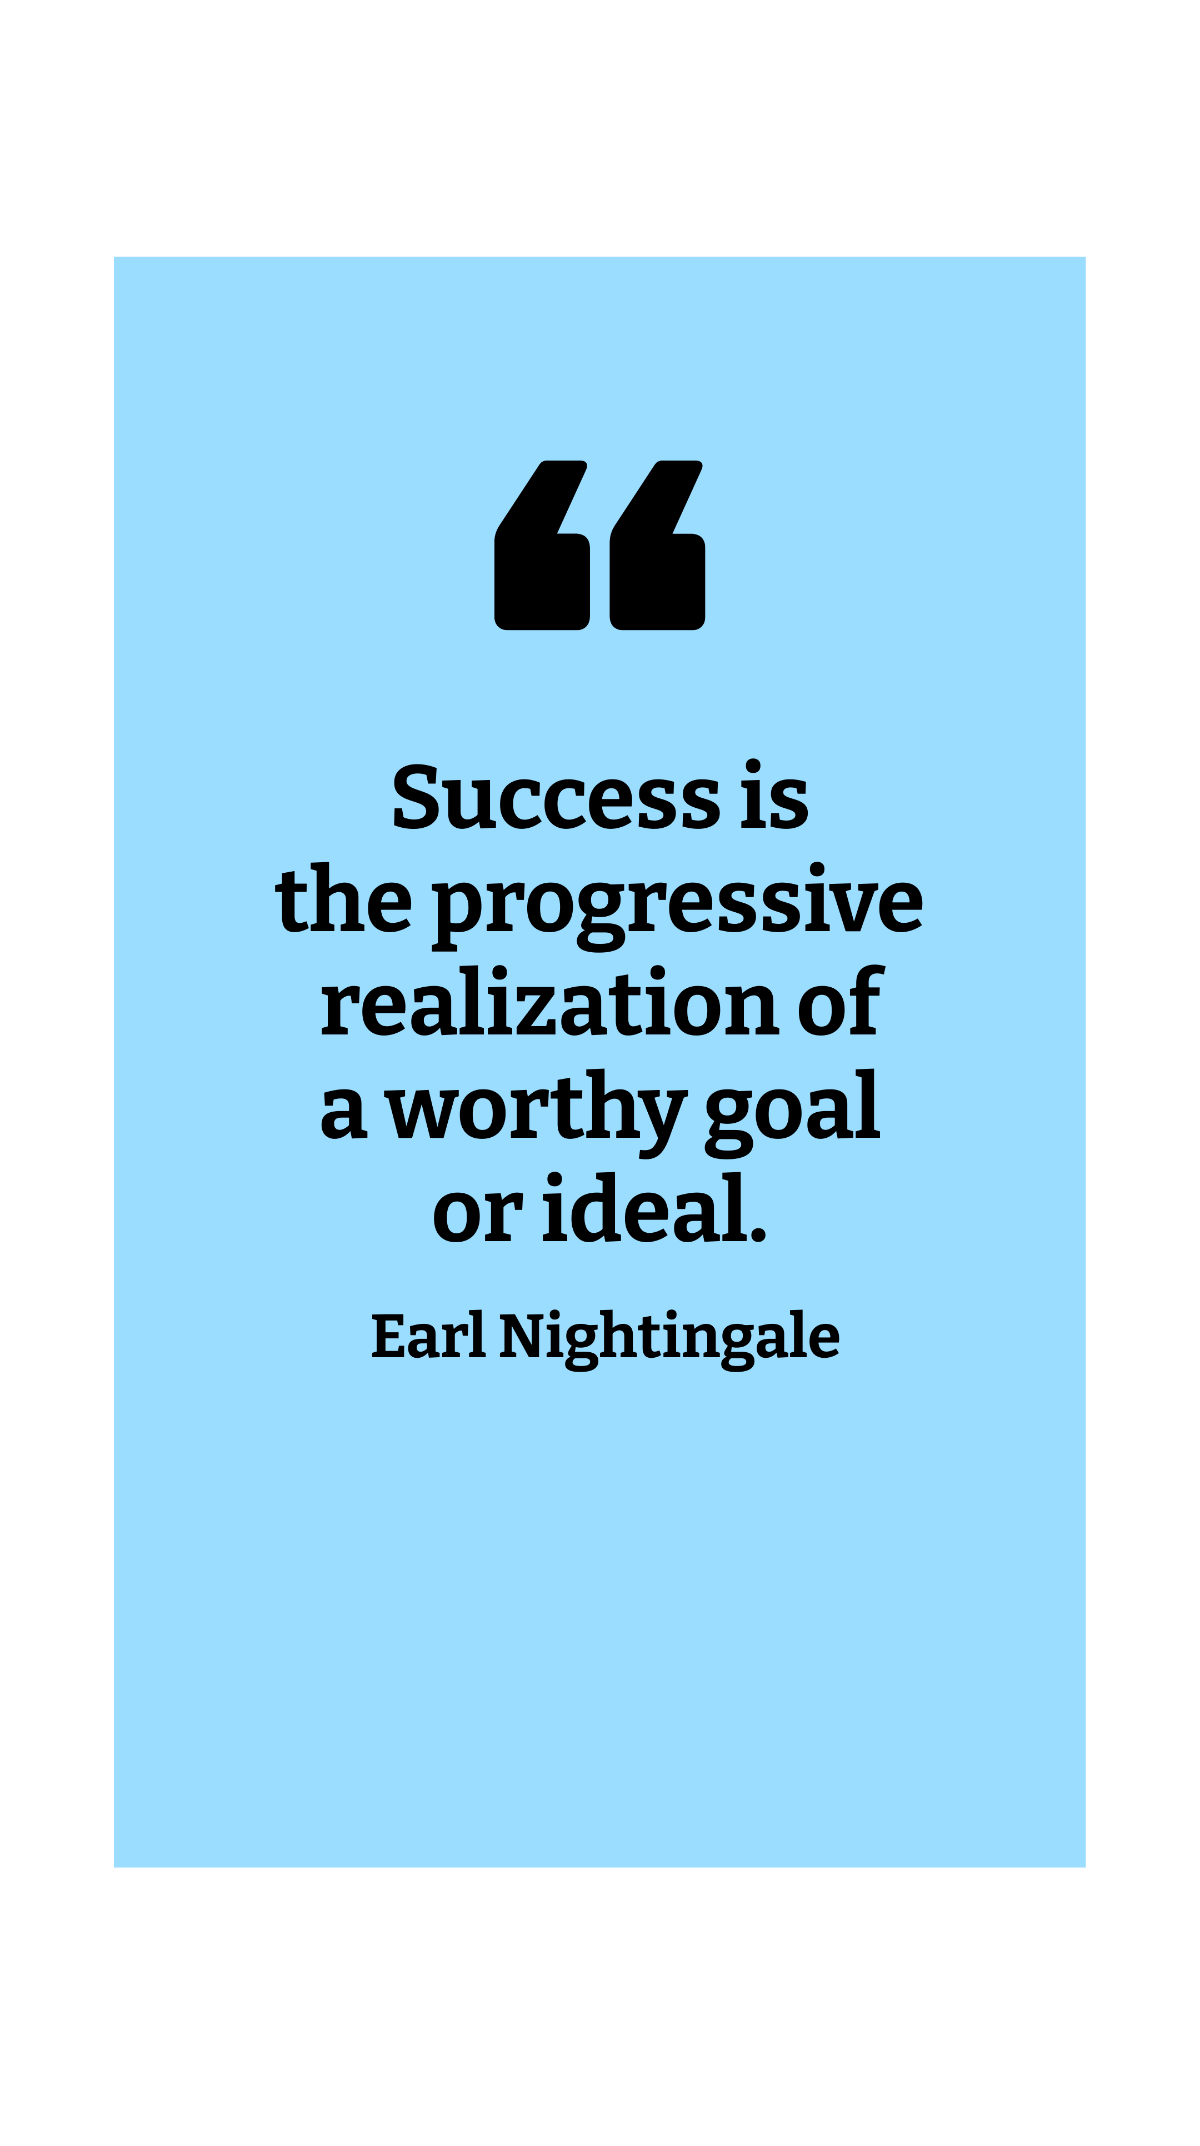 Earl Nightingale - Success is the progressive realization of a worthy goal or ideal. Template